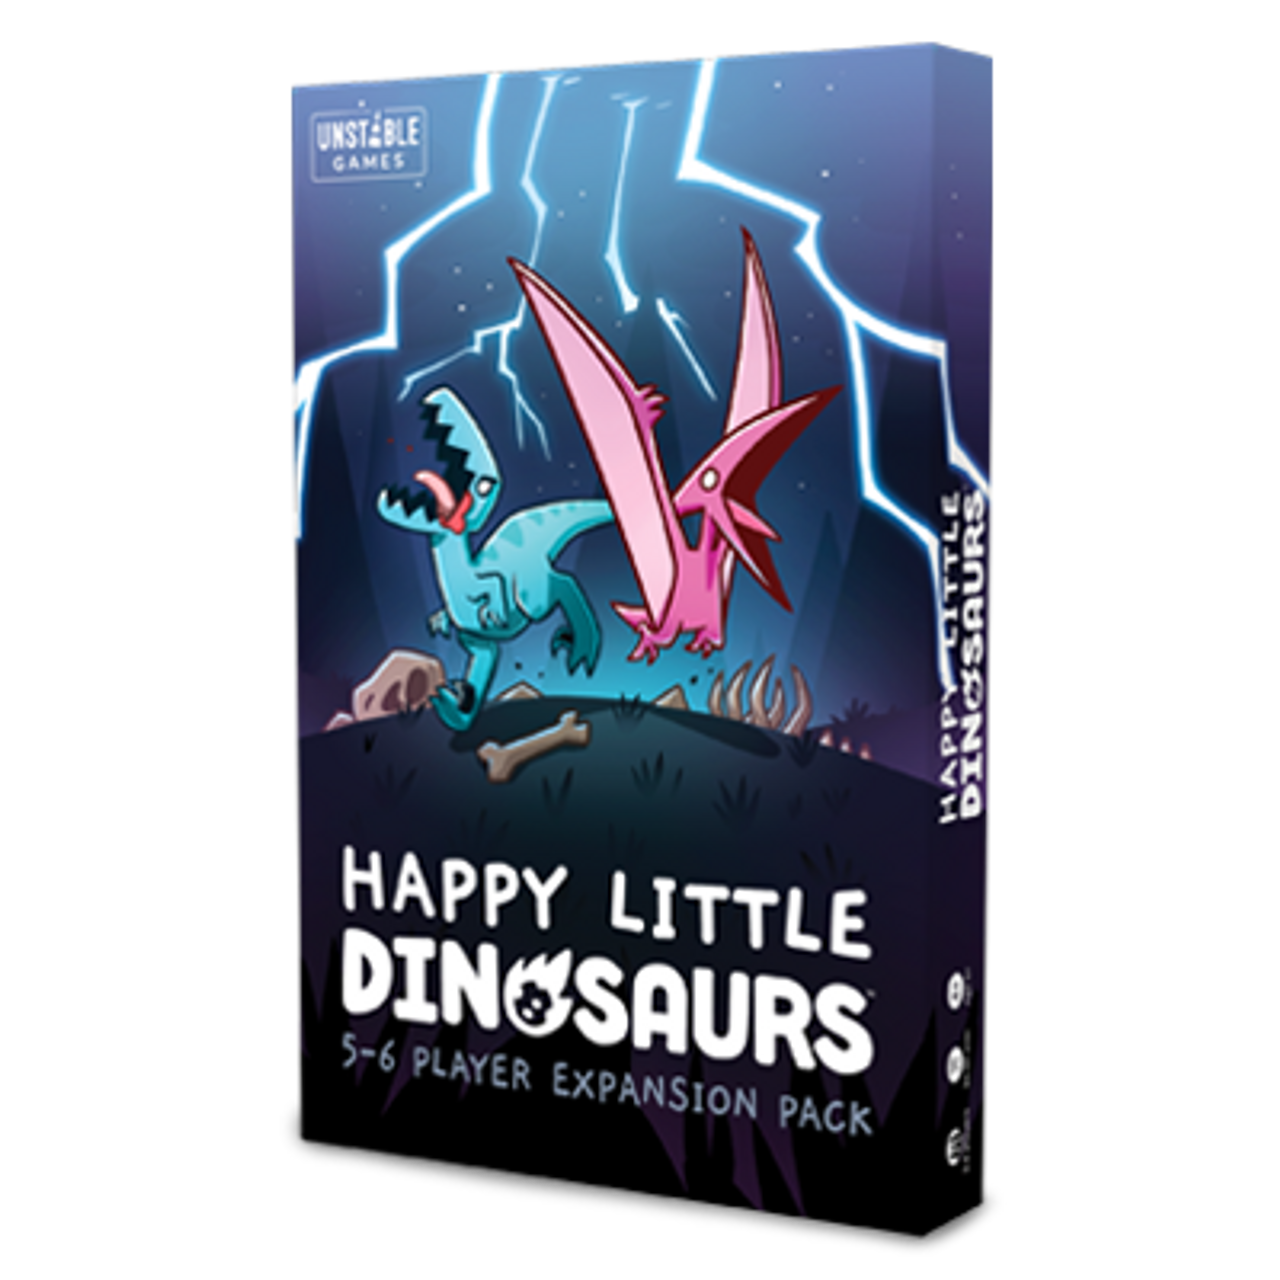 Happy Little Dinosaurs: 5-6 Player Expansion - Shuffle and Cut Games